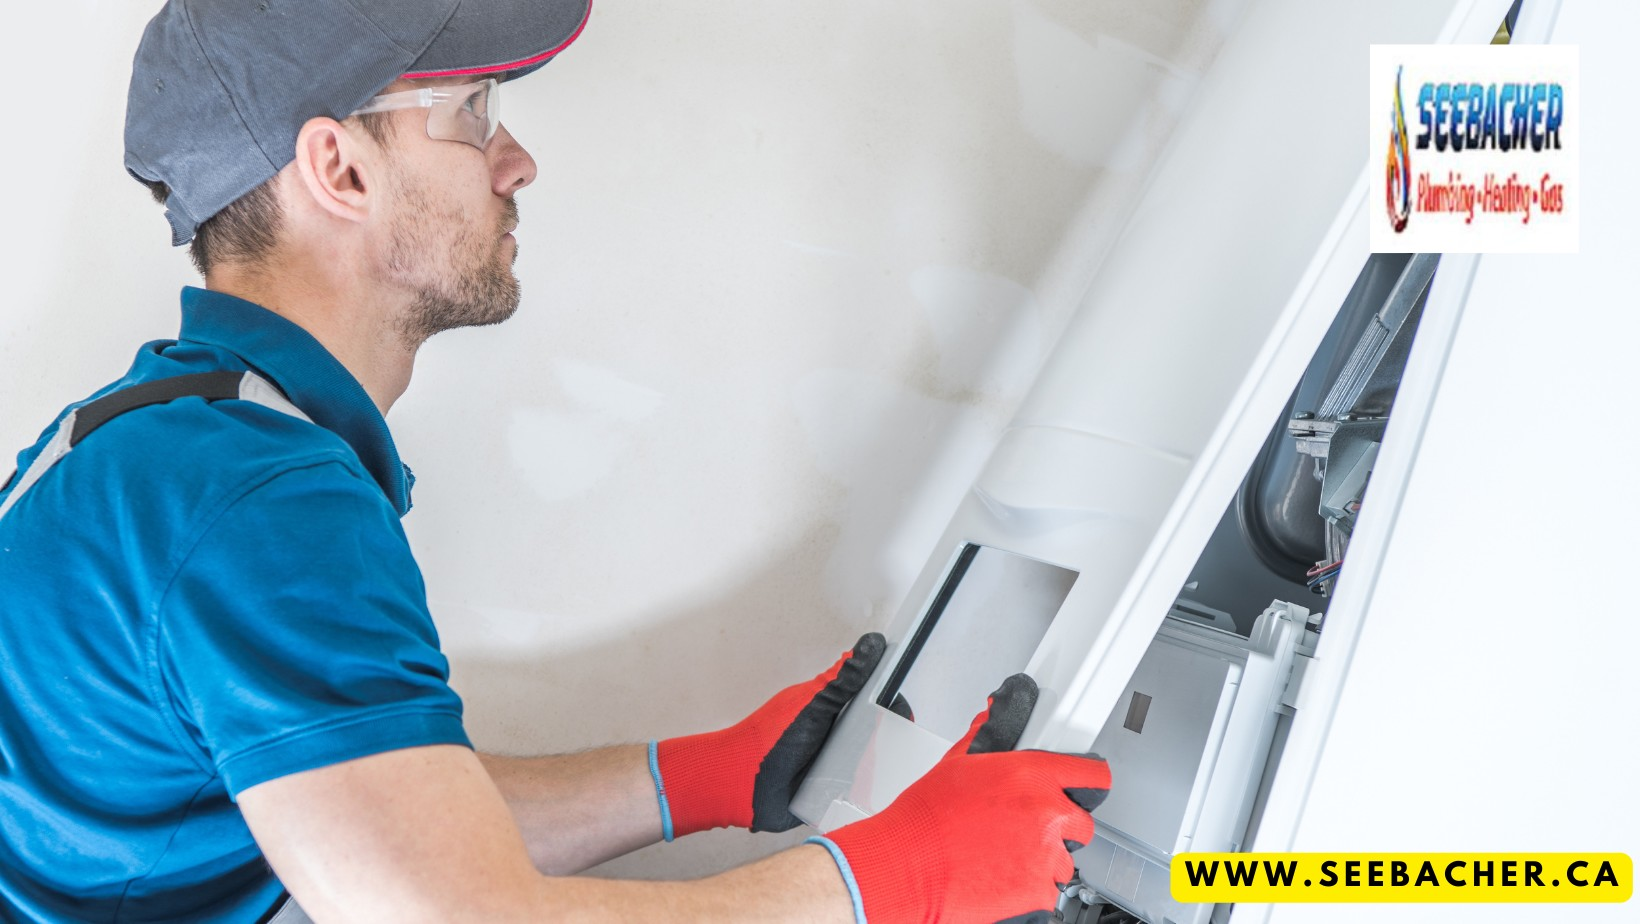 Contact Seebacher Plumbing & Heating Ltd. for Heating Services in North Vancouver